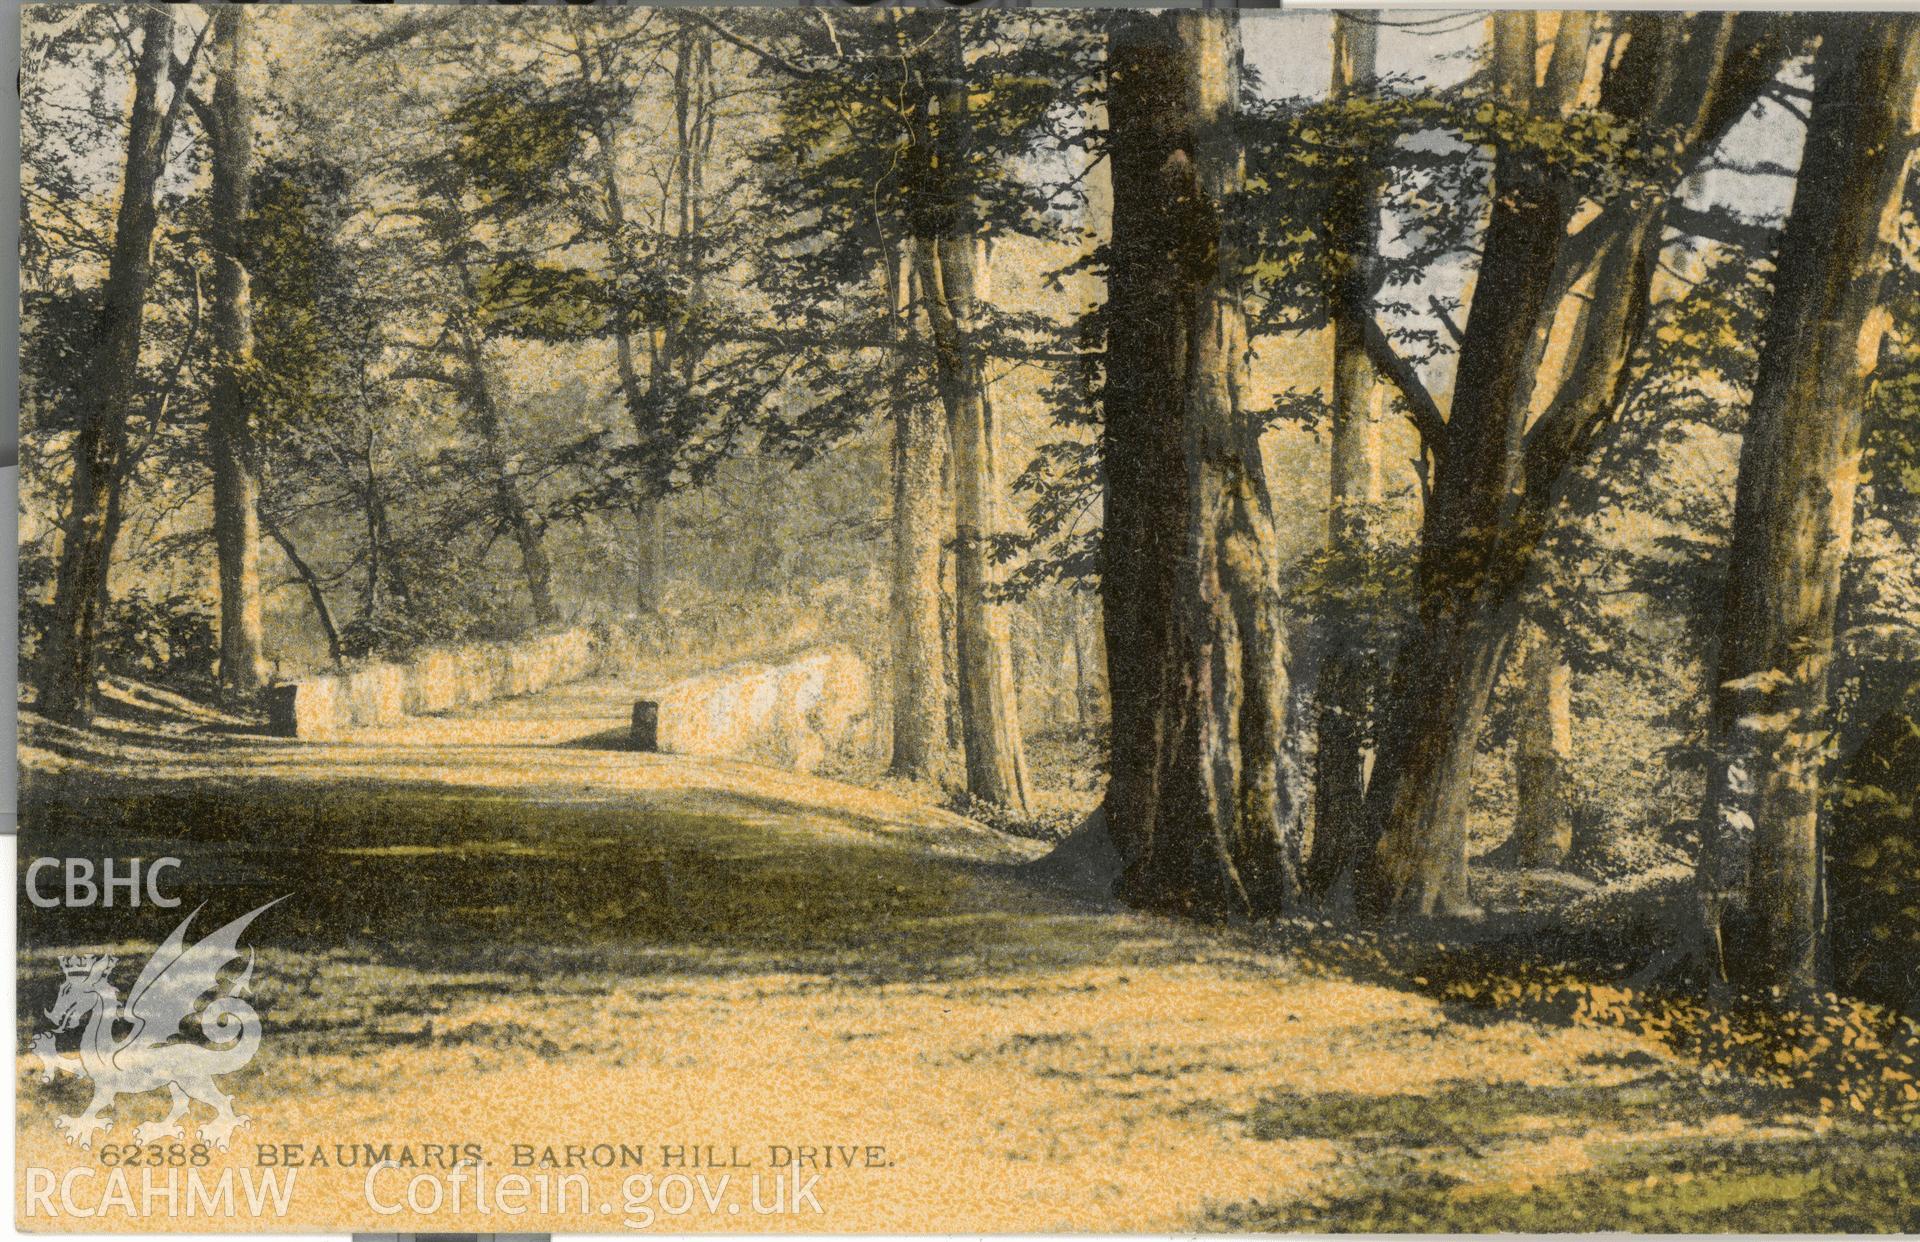 Digitised postcard image of Baron Hill Gardens, Beaumaris. Produced by Parks and Gardens Data Services, from an original item in the Peter Davis Collection at Parks and Gardens UK. We hold only web-resolution images of this collection, suitable for viewing on screen and for research purposes only. We do not hold the original images, or publication quality scans.